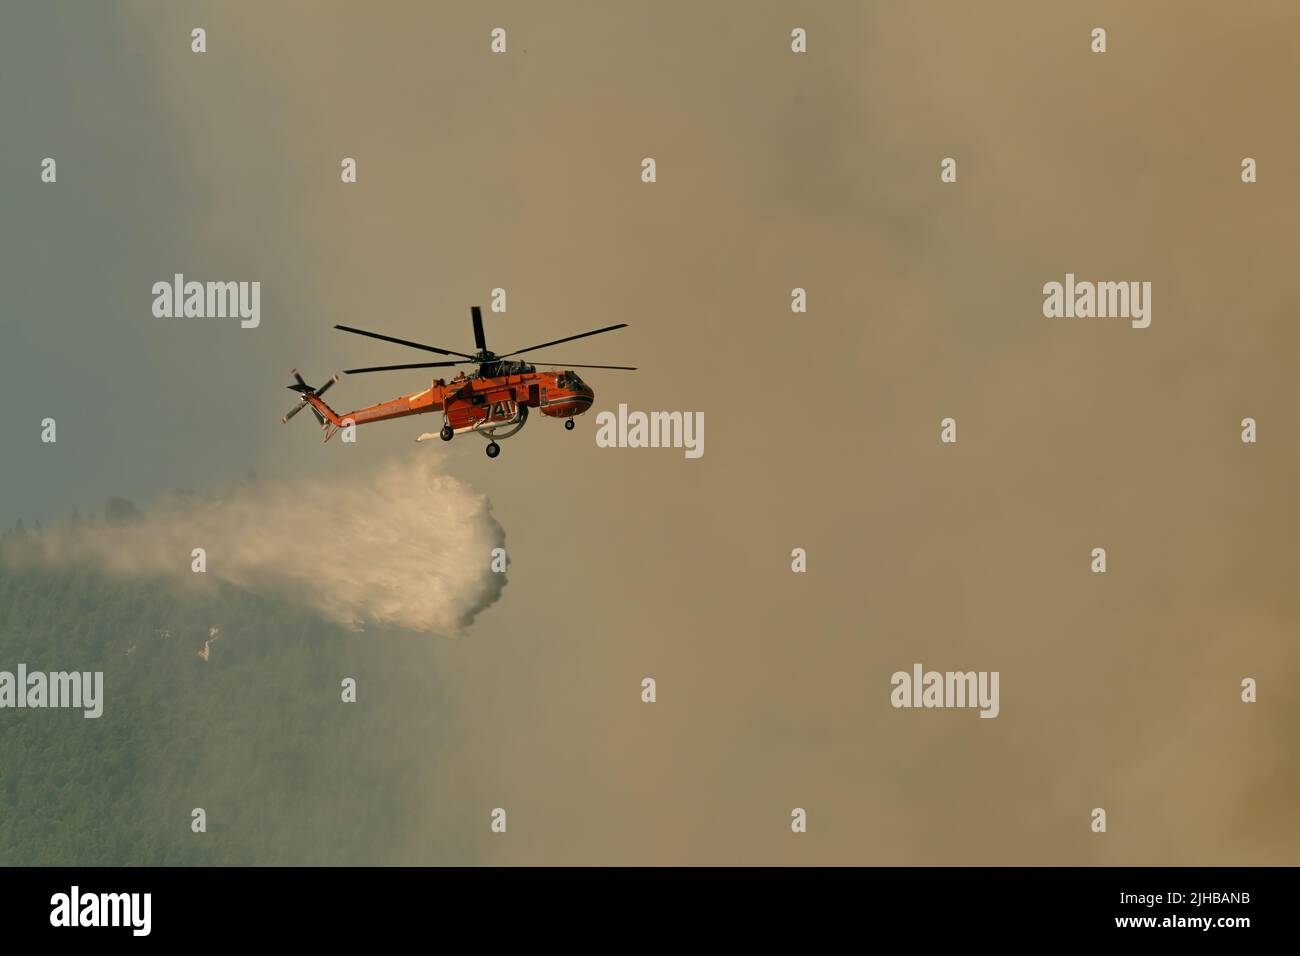 Loutraki, Greece 14 September 2019. Fire helicopter spraying water to eliminate the fire. Stock Photo